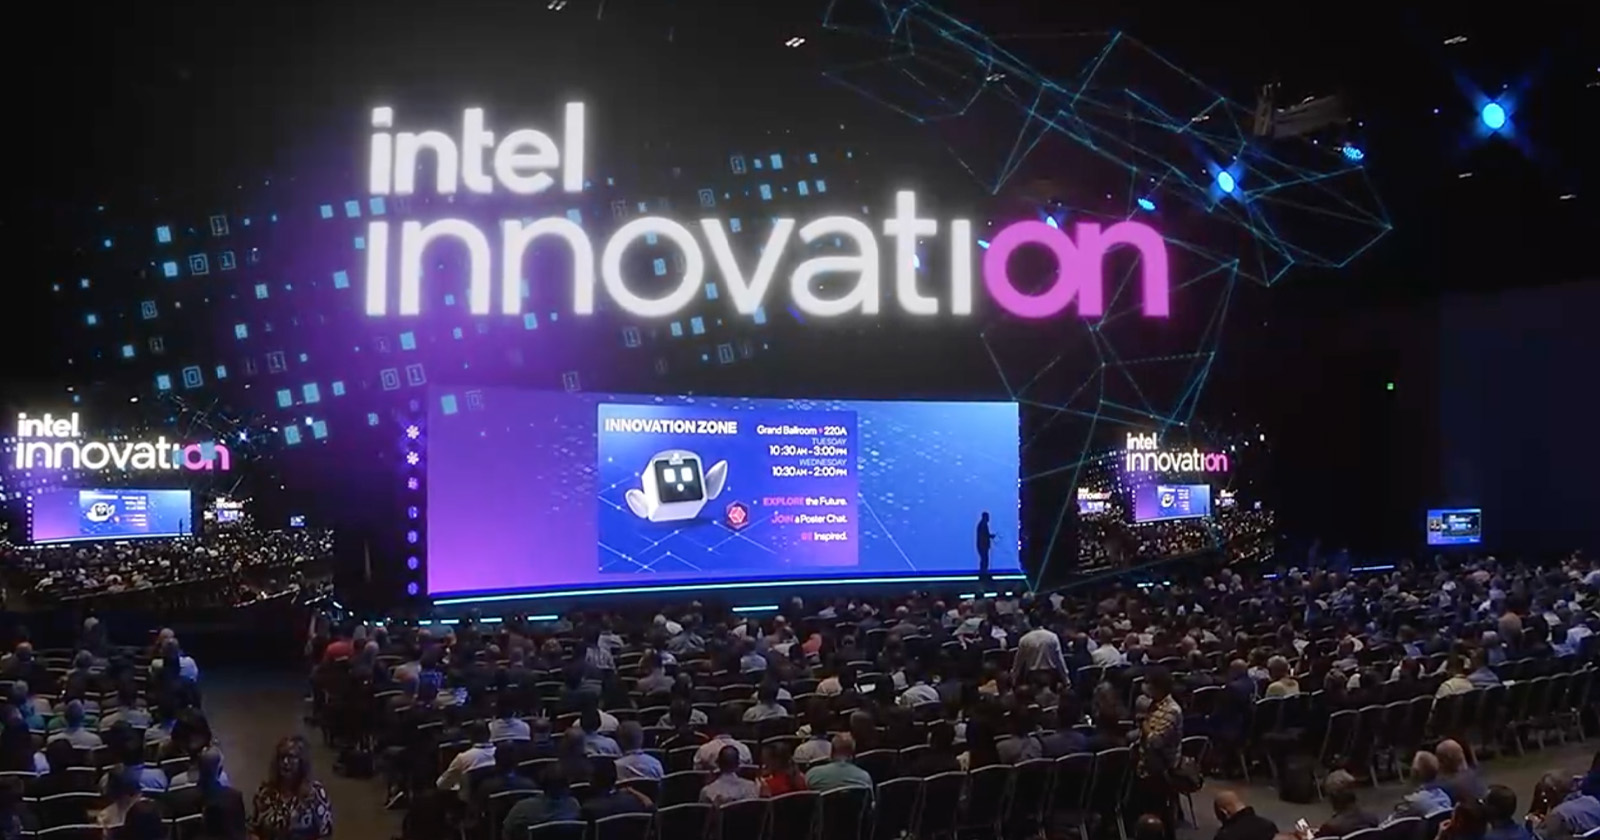 Intel’s Expanding Innovation: Bridging AI, Silicon, and Software in the New Age of ‘Siliconomics’